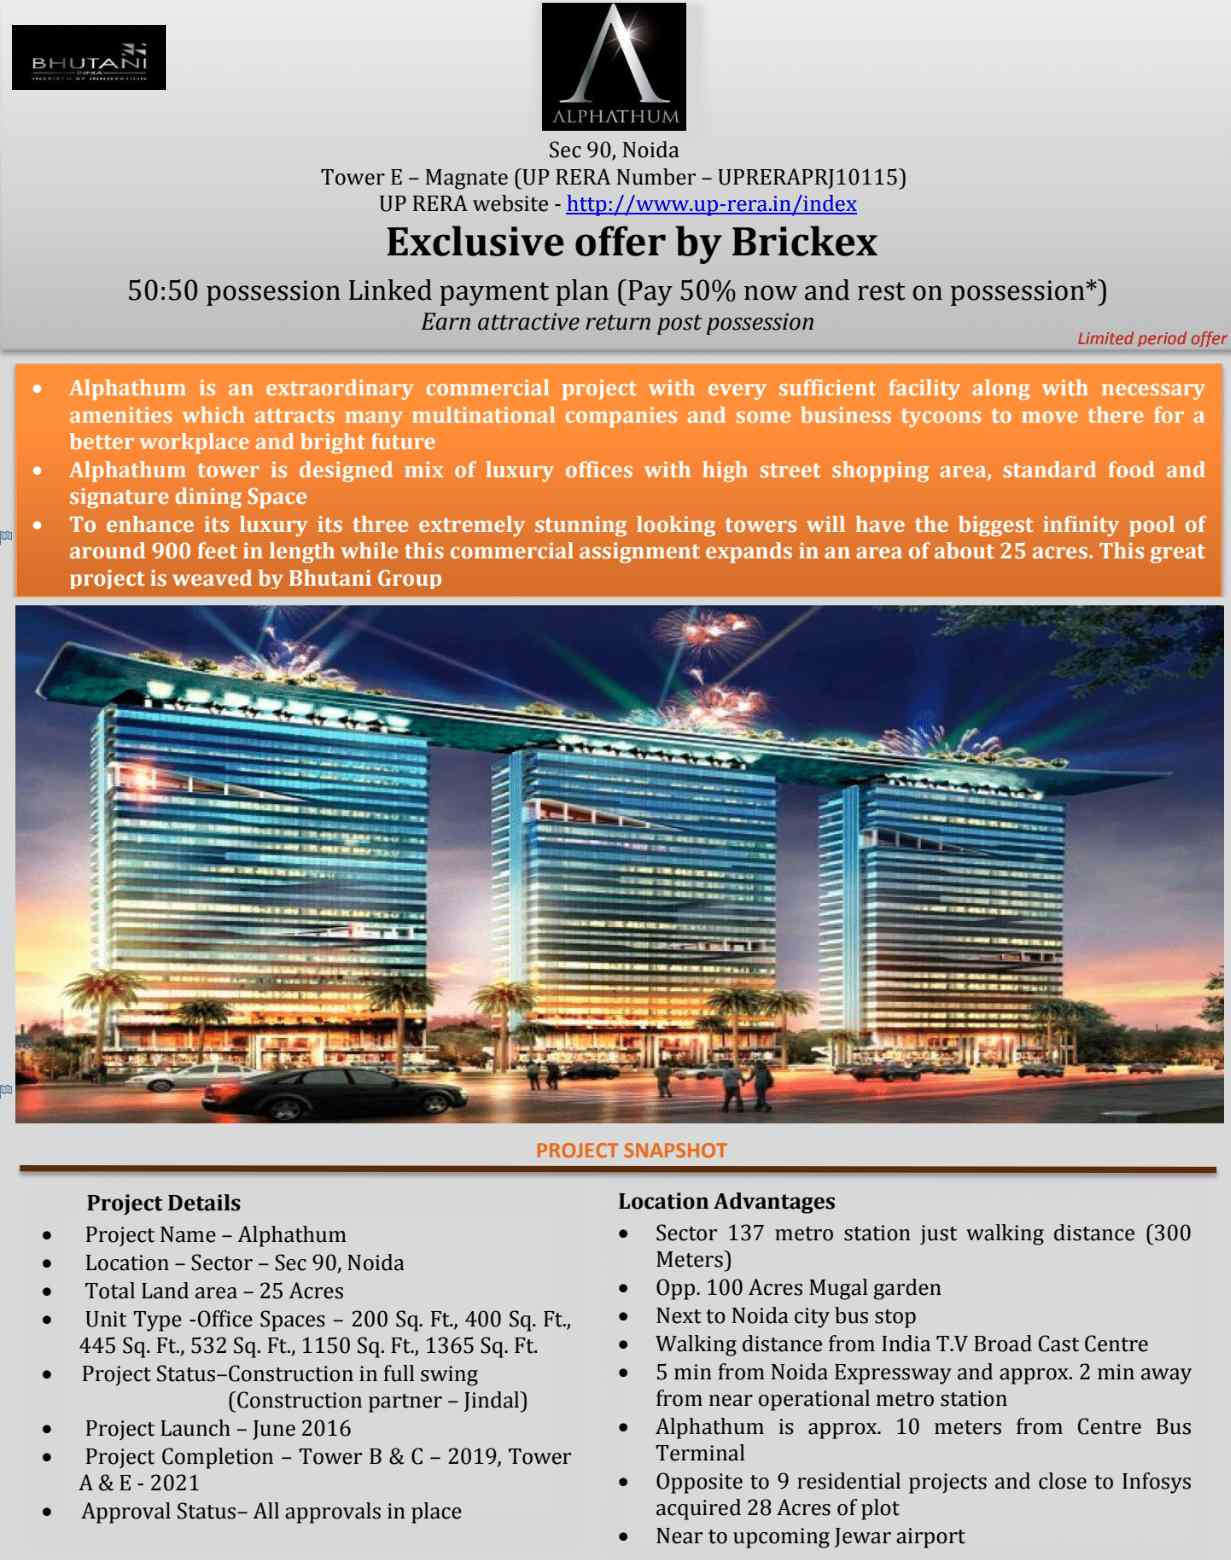 Avail 50:50 possession linked payment plan at Bhutani Alphathum in Noida Update